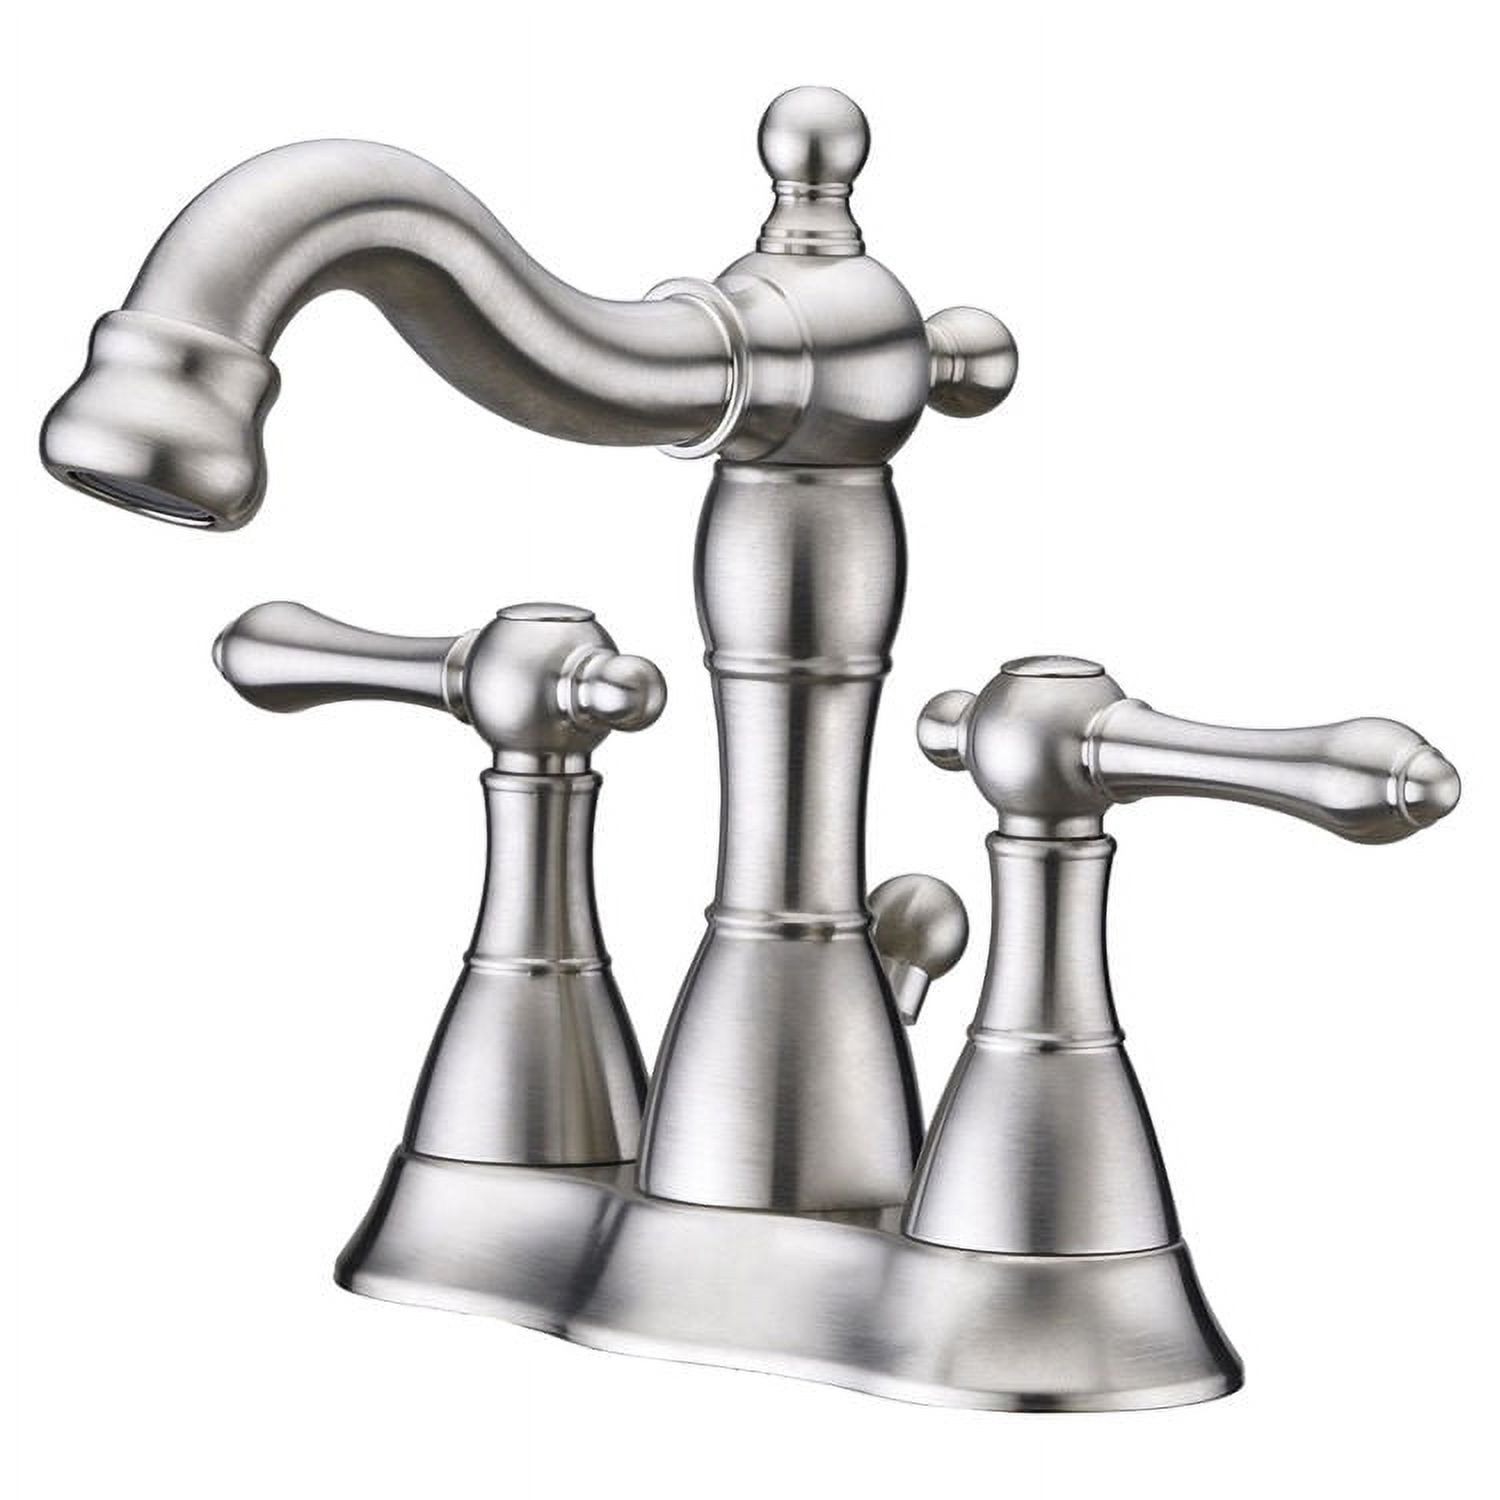 Ultra Faucets UF45213 Prime Two-Handle Centerset Bathroom Faucet, Brushed Nickel - image 1 of 4